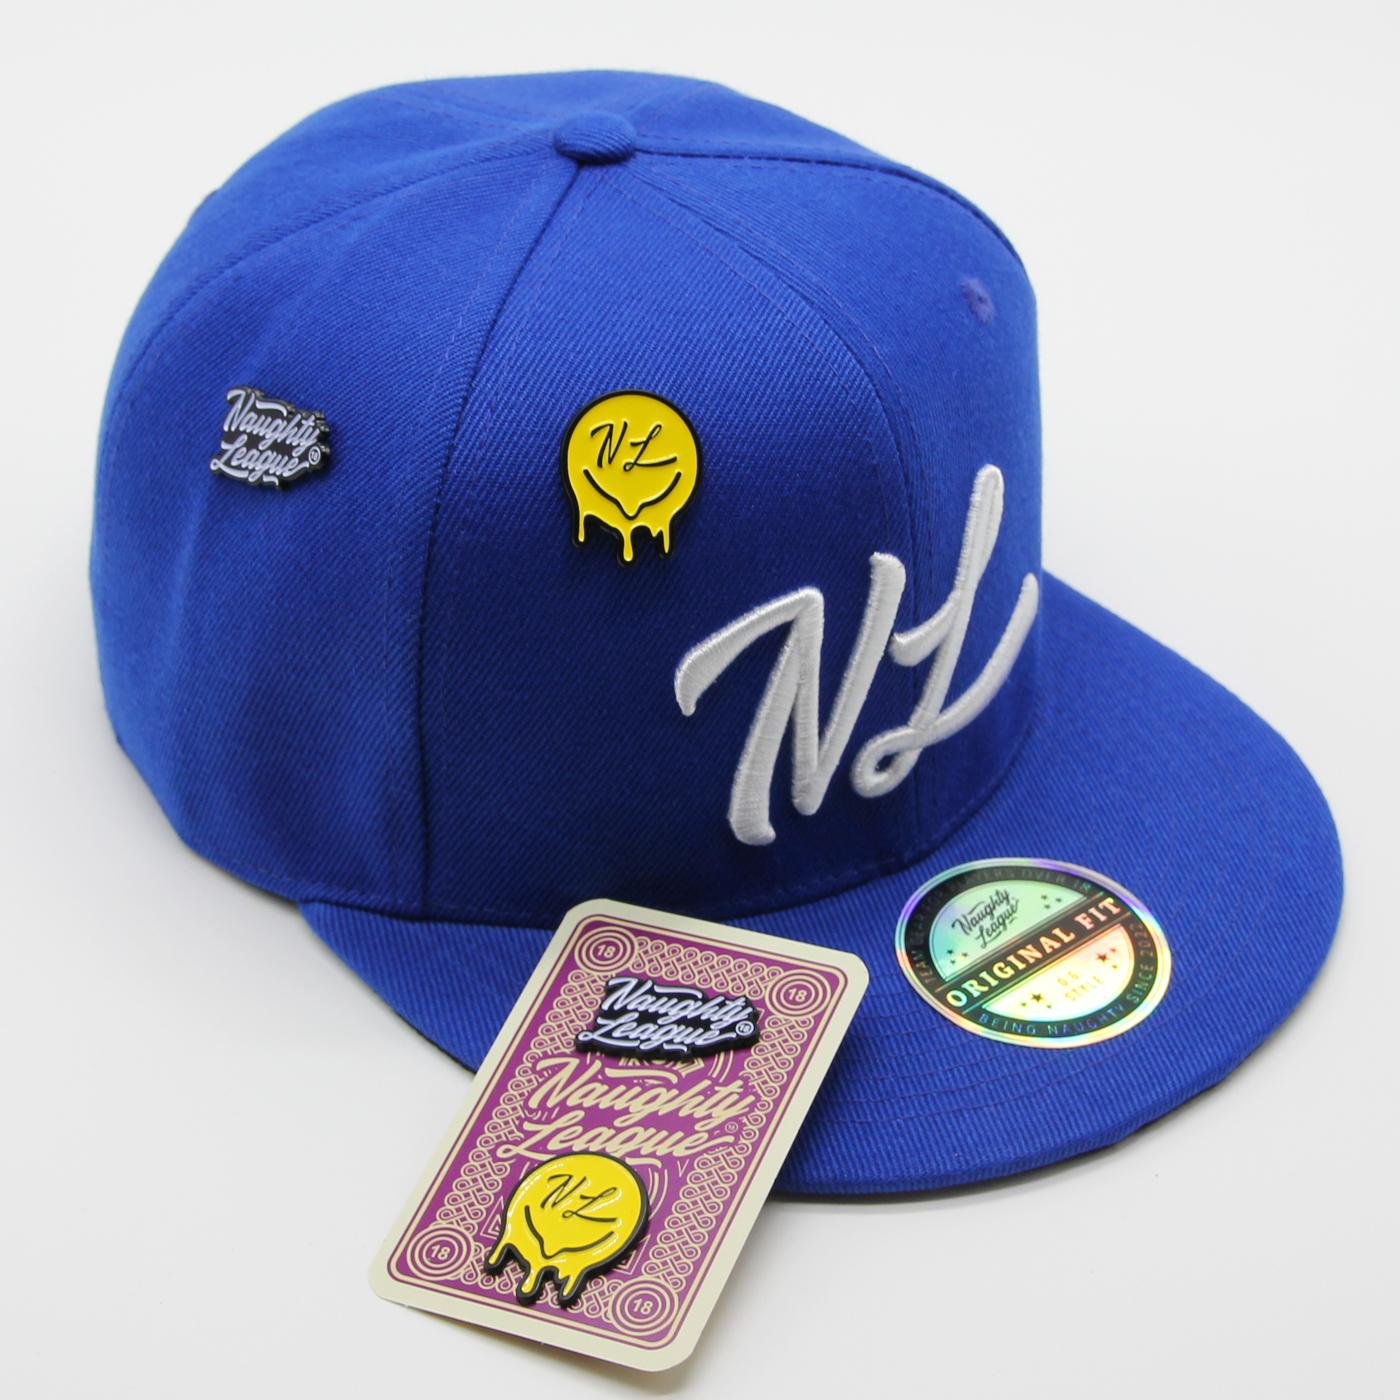 Naughty League Icon Basic Fitted royal/white - Shop-Tetuan